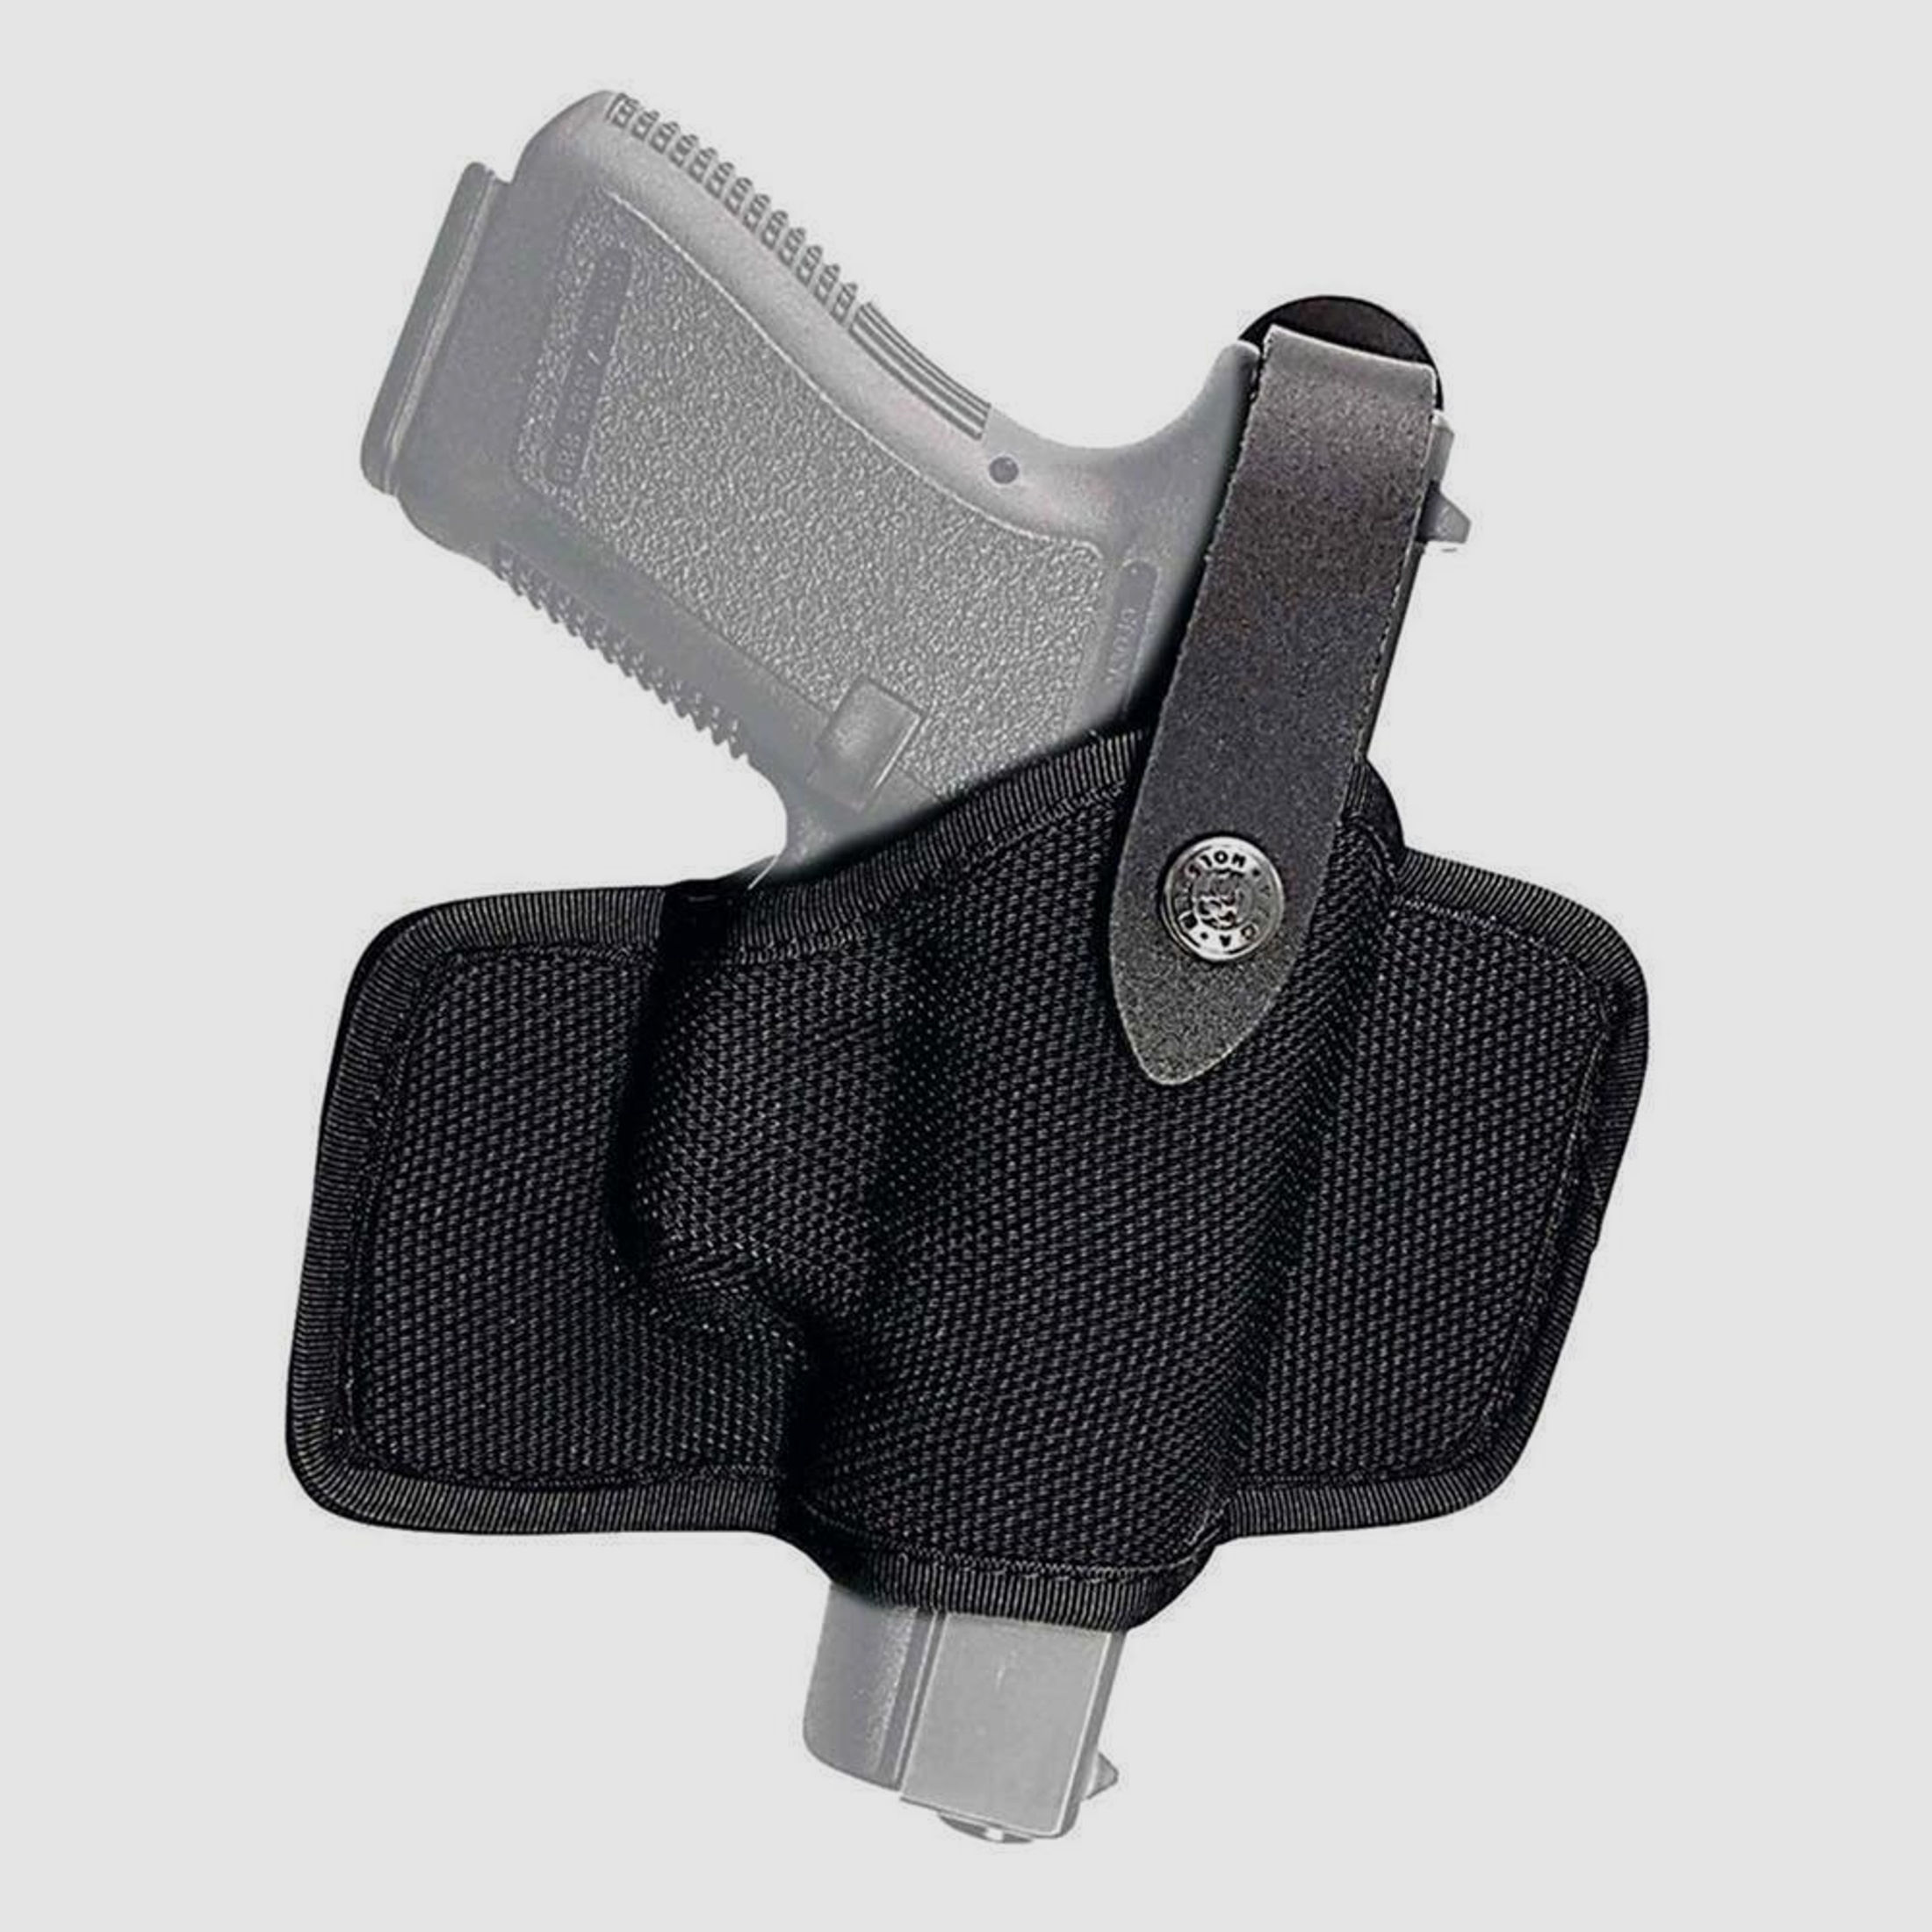 Thermo-geformtes Corduraholster Glock 17/18/19/19X/22/31/37/23/25/32/38/45 M&P,Springfield XD/Compact/XDM,Walther PPS Linkshänder